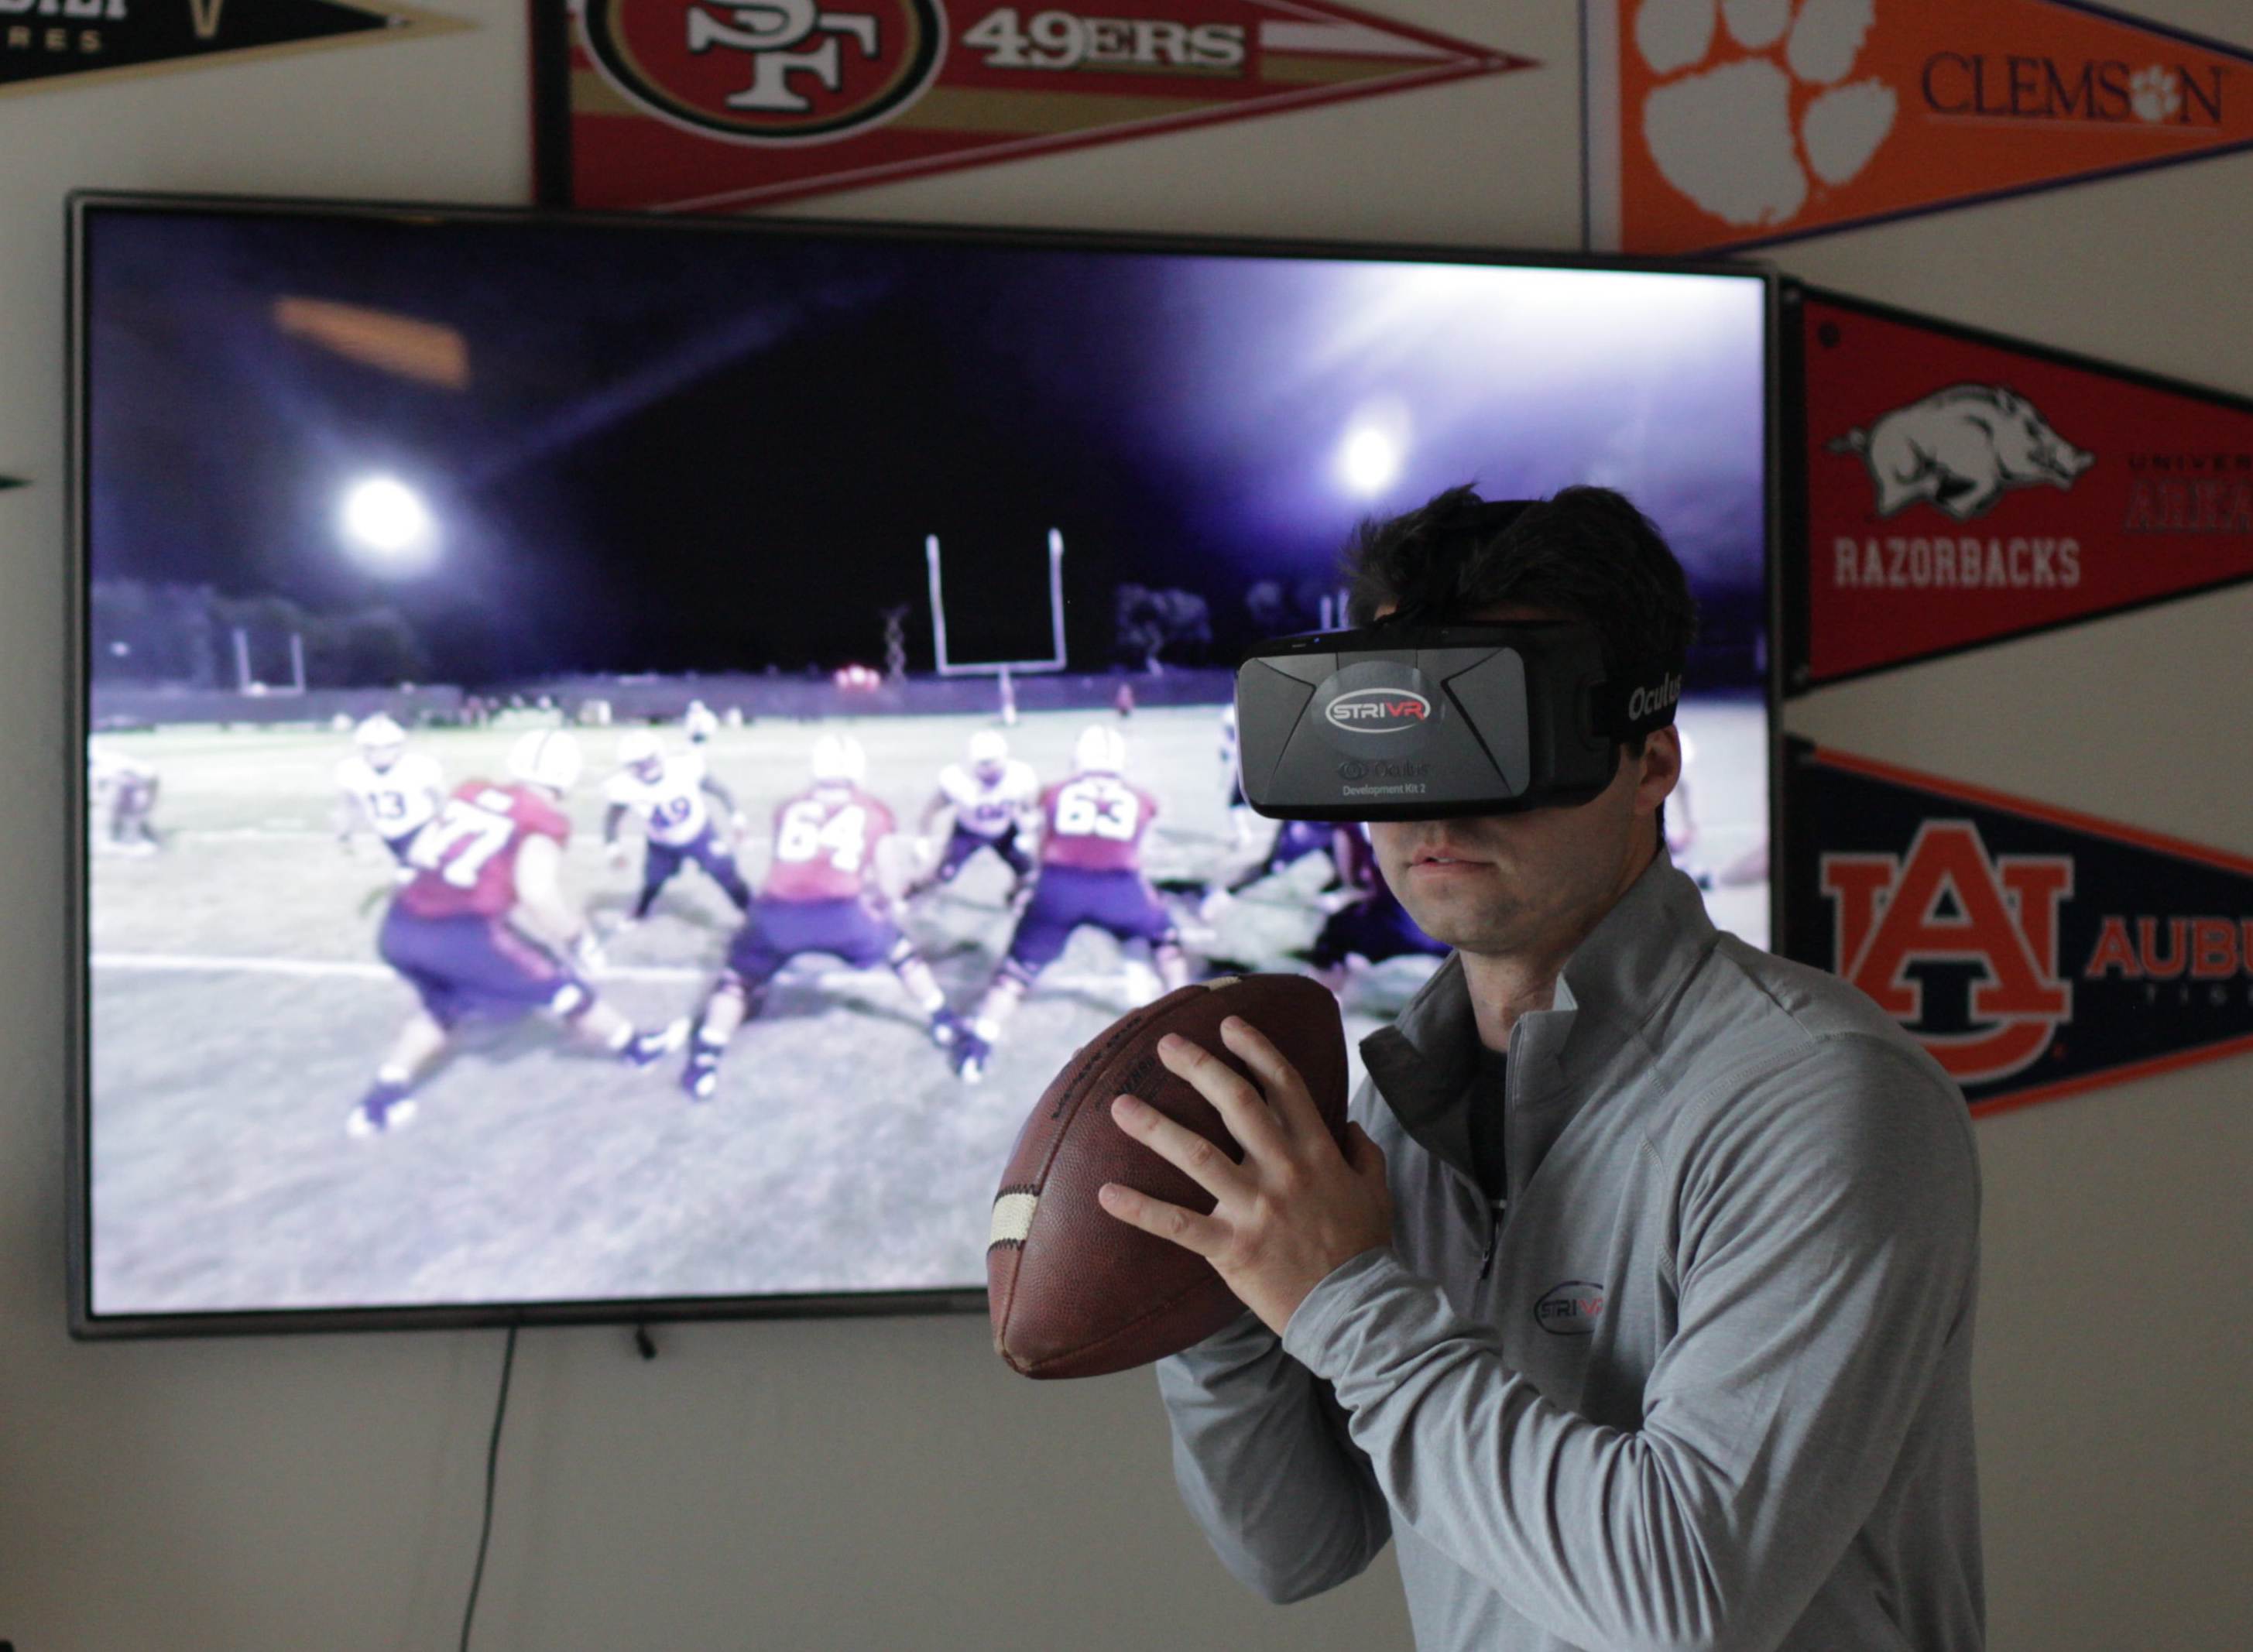 VR Sports Experiences: Get Closer To The Action With Virtual Reality Sports Events. 6. The Future of VR Sports Experiences